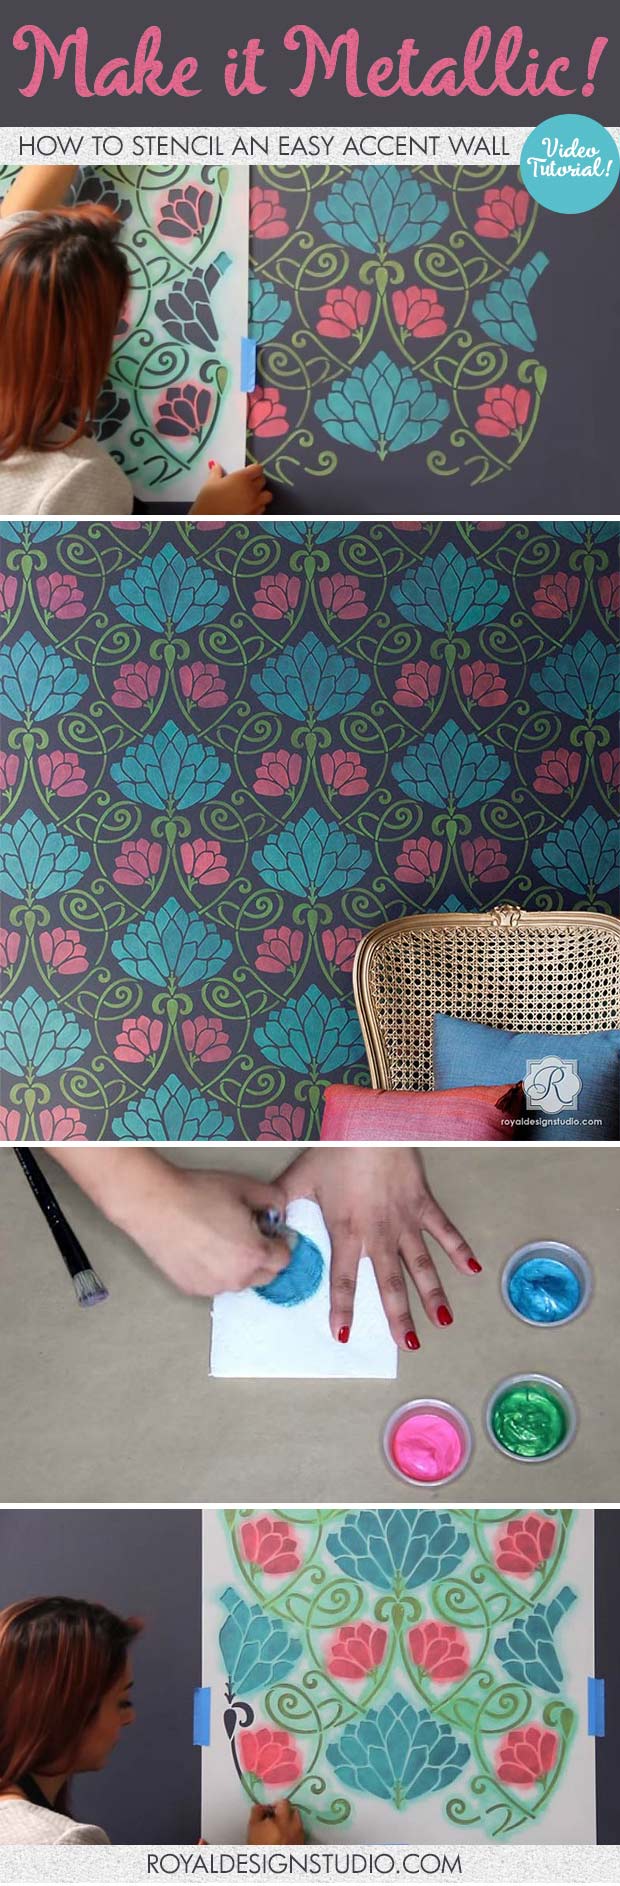 VIDEO Tutorial - How to Stencil an Easy Accent Wall with Metallic Paint - Flower Wall Stencils by Royal Design Studio